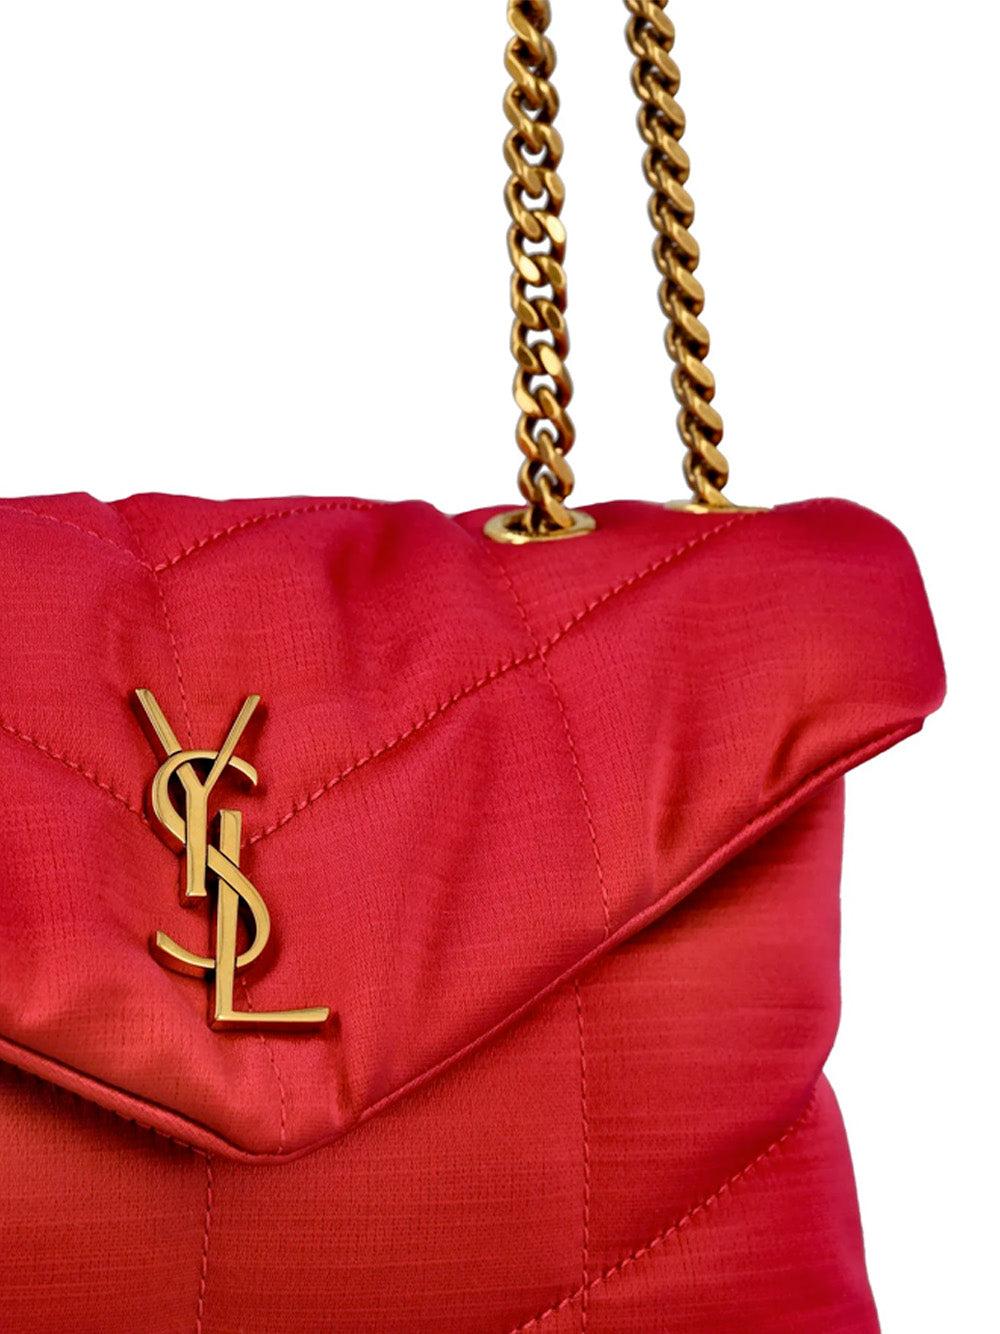 Saint Laurent Toy Puffer Bag in Red | Lyst